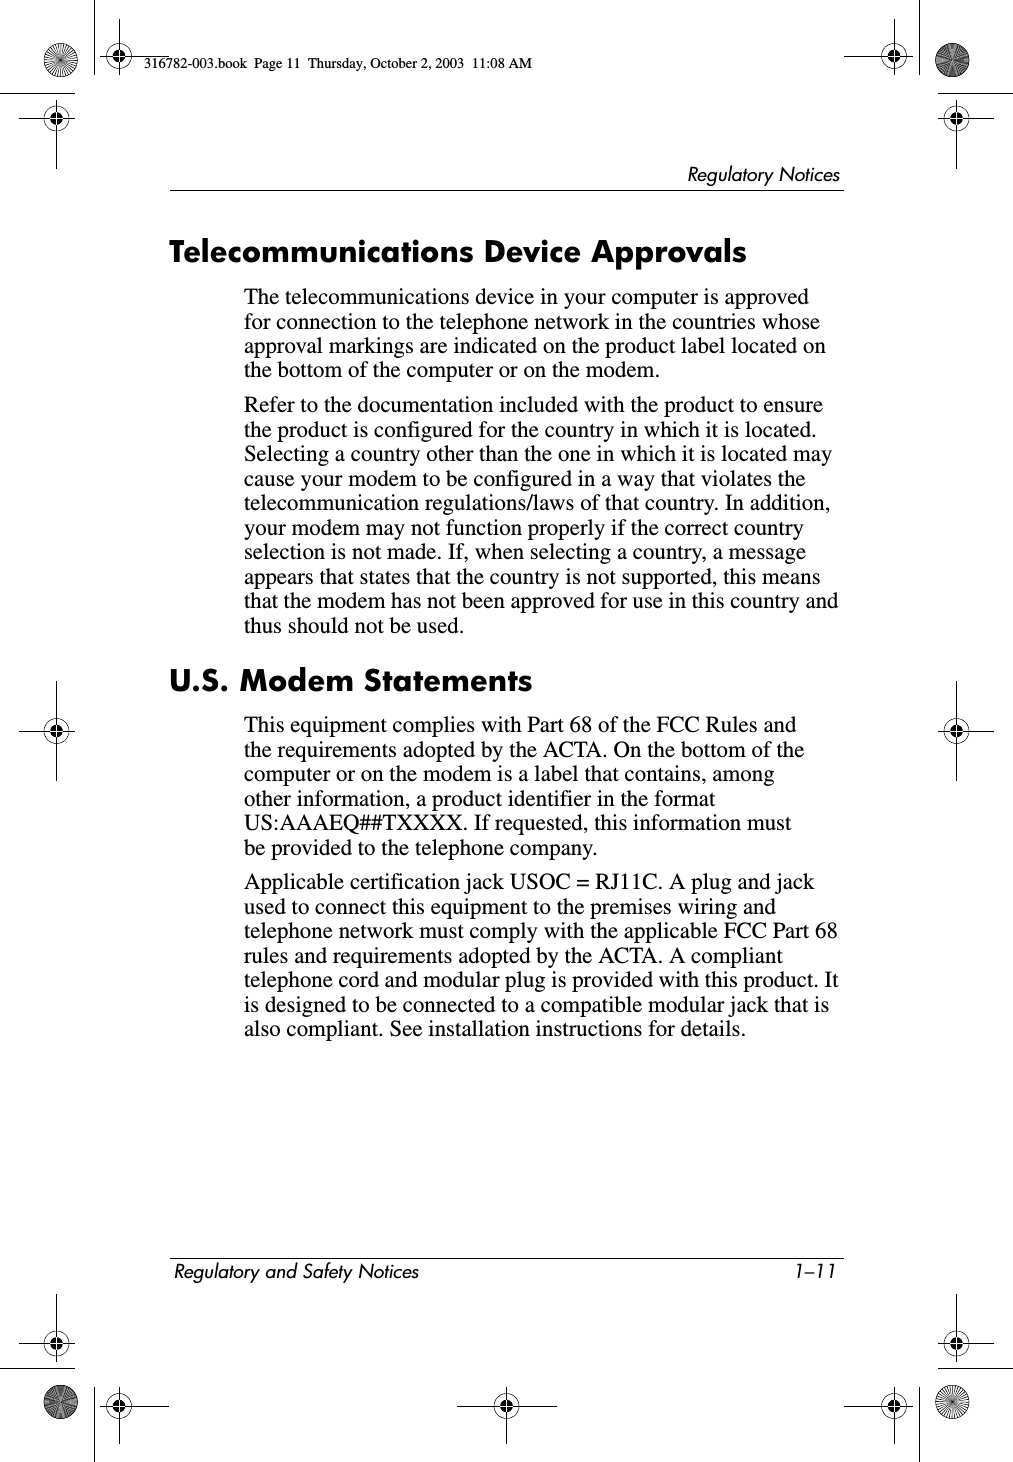 Regulatory NoticesRegulatory and Safety Notices 1–11Telecommunications Device ApprovalsThe telecommunications device in your computer is approved for connection to the telephone network in the countries whose approval markings are indicated on the product label located on the bottom of the computer or on the modem.Refer to the documentation included with the product to ensure the product is configured for the country in which it is located. Selecting a country other than the one in which it is located may cause your modem to be configured in a way that violates the telecommunication regulations/laws of that country. In addition, your modem may not function properly if the correct country selection is not made. If, when selecting a country, a message appears that states that the country is not supported, this means that the modem has not been approved for use in this country and thus should not be used.U.S. Modem StatementsThis equipment complies with Part 68 of the FCC Rules and the requirements adopted by the ACTA. On the bottom of the computer or on the modem is a label that contains, among other information, a product identifier in the format US:AAAEQ##TXXXX. If requested, this information must be provided to the telephone company.Applicable certification jack USOC = RJ11C. A plug and jack used to connect this equipment to the premises wiring and telephone network must comply with the applicable FCC Part 68 rules and requirements adopted by the ACTA. A compliant telephone cord and modular plug is provided with this product. It is designed to be connected to a compatible modular jack that is also compliant. See installation instructions for details.316782-003.book  Page 11  Thursday, October 2, 2003  11:08 AM